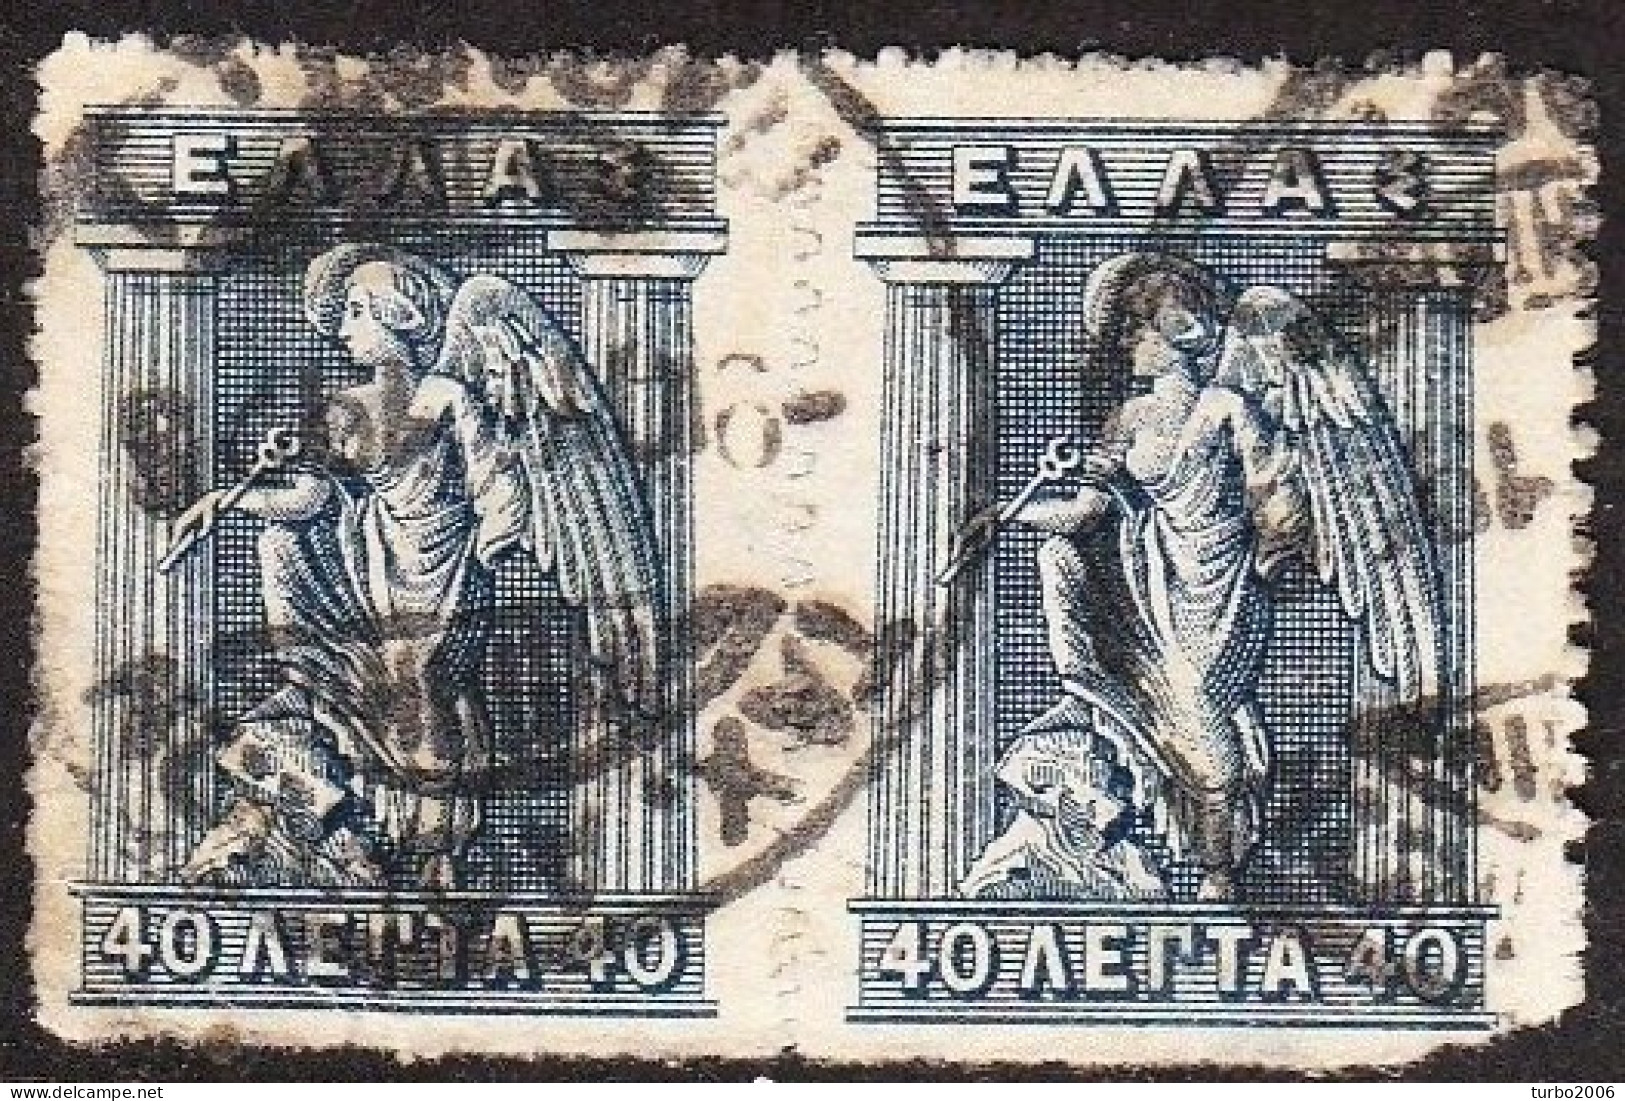 GREECE 1913-27 Lithographic Issue 40 L Blue VIENNA Issue With Special Perforation In PAIR !! Vl. 237 B - Oblitérés